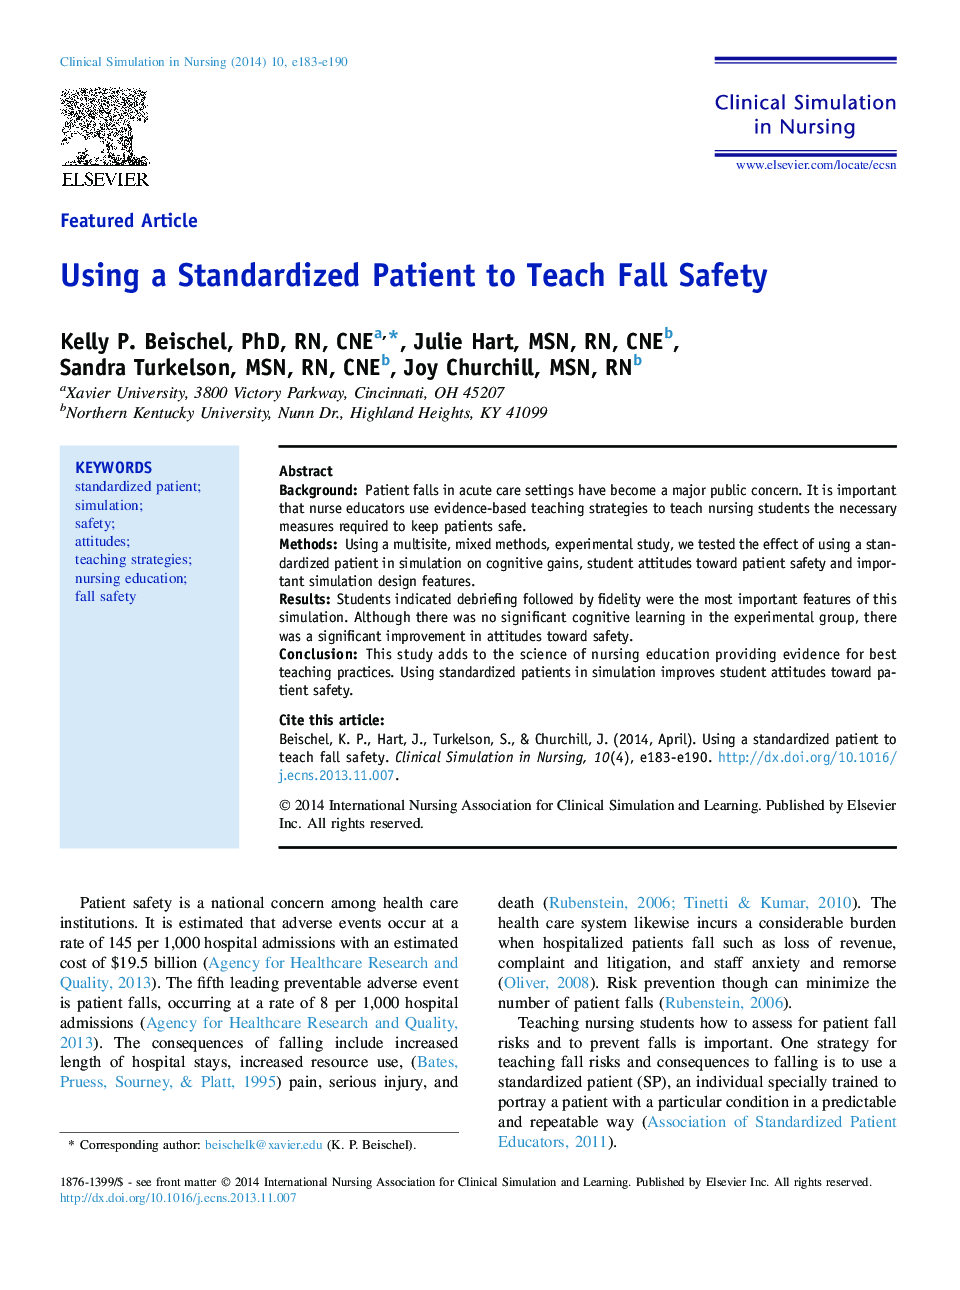 Using a Standardized Patient to Teach Fall Safety